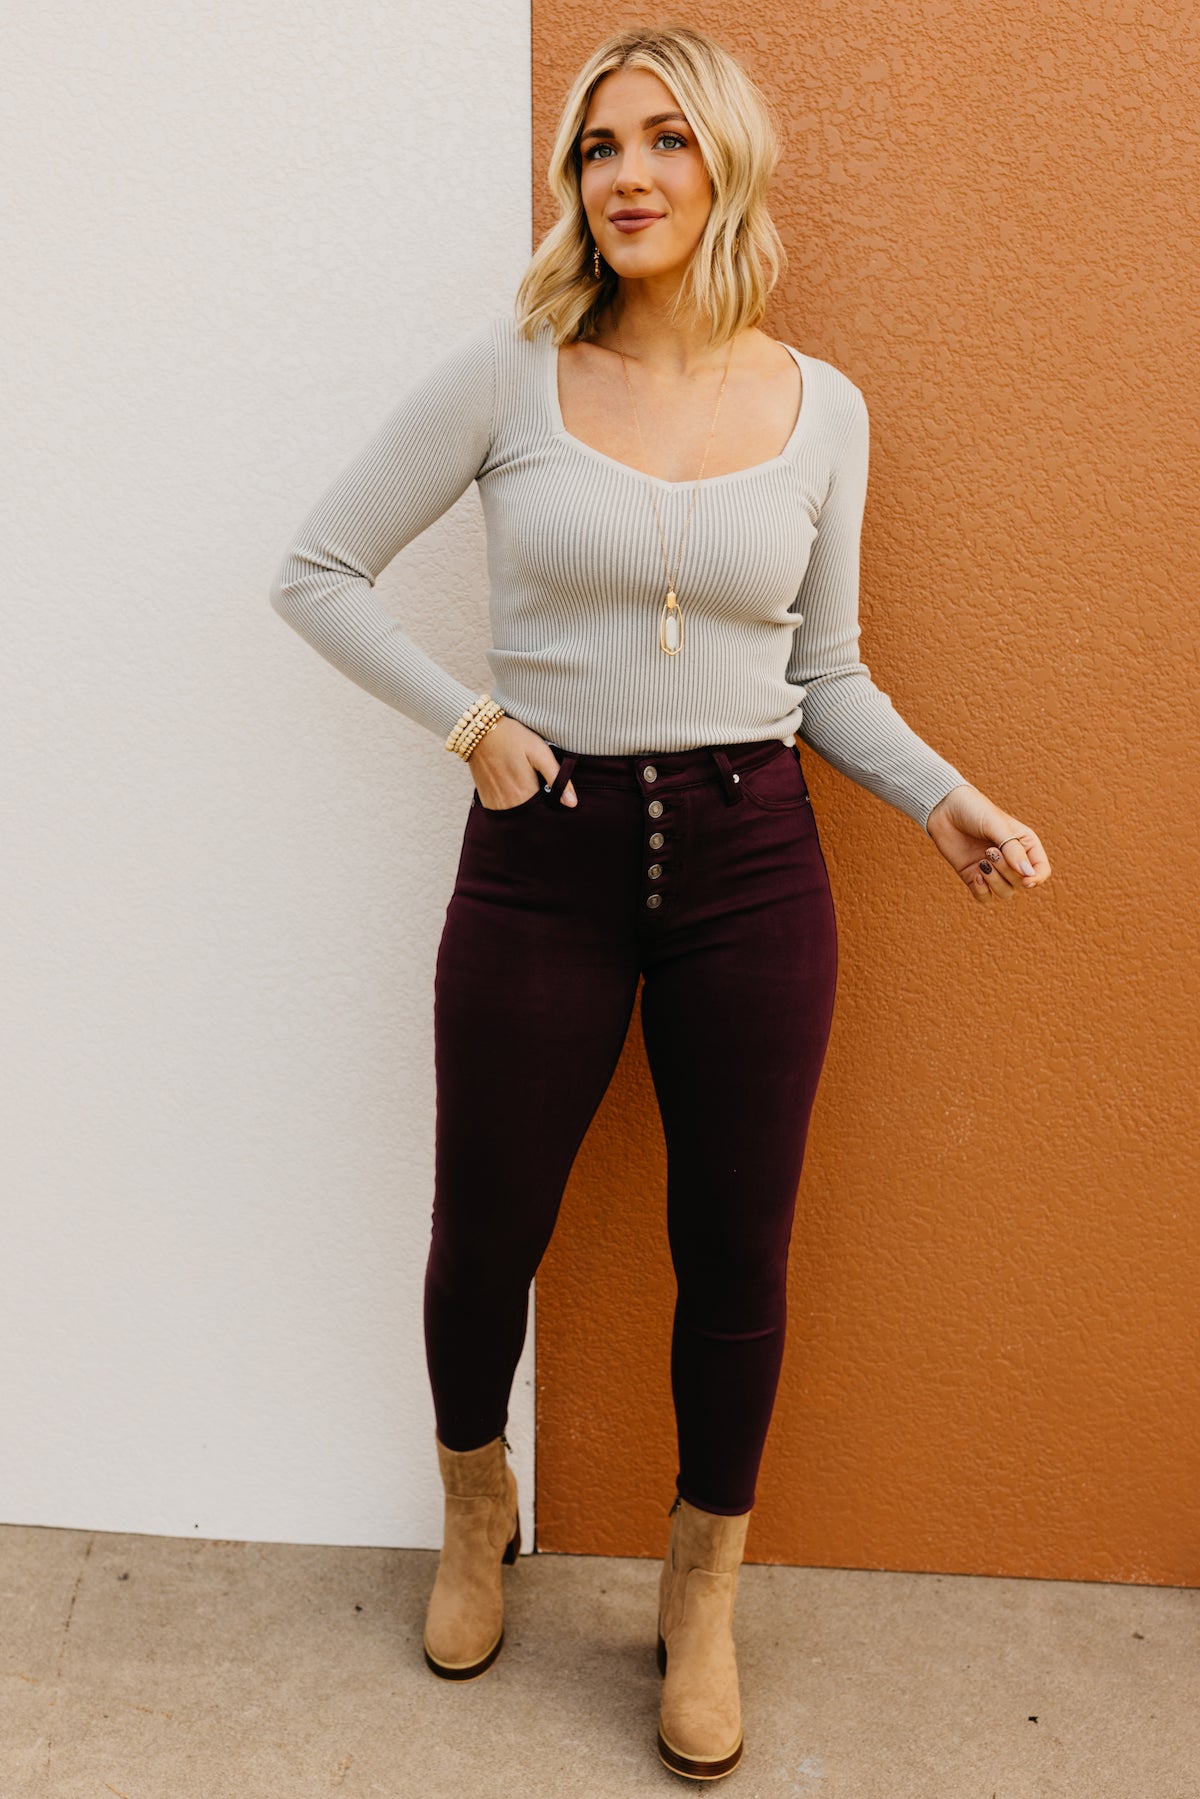 The Jacoby Sweatheart Neck Sweater Top  - FINAL SALE